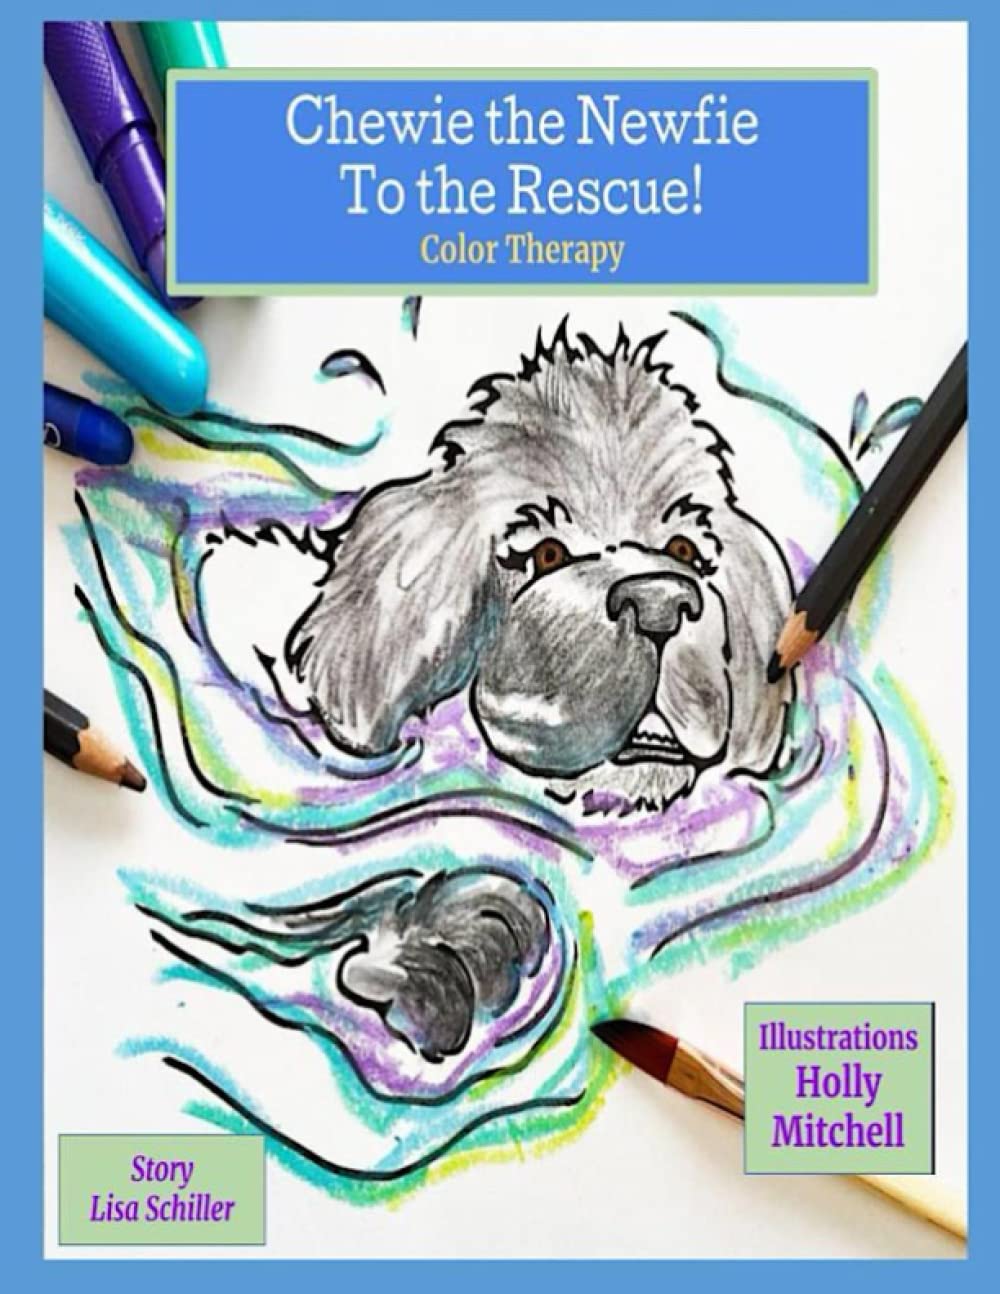 Chewie the Newfie To The Rescue: 'Be Like a Newfie' Color Therapy